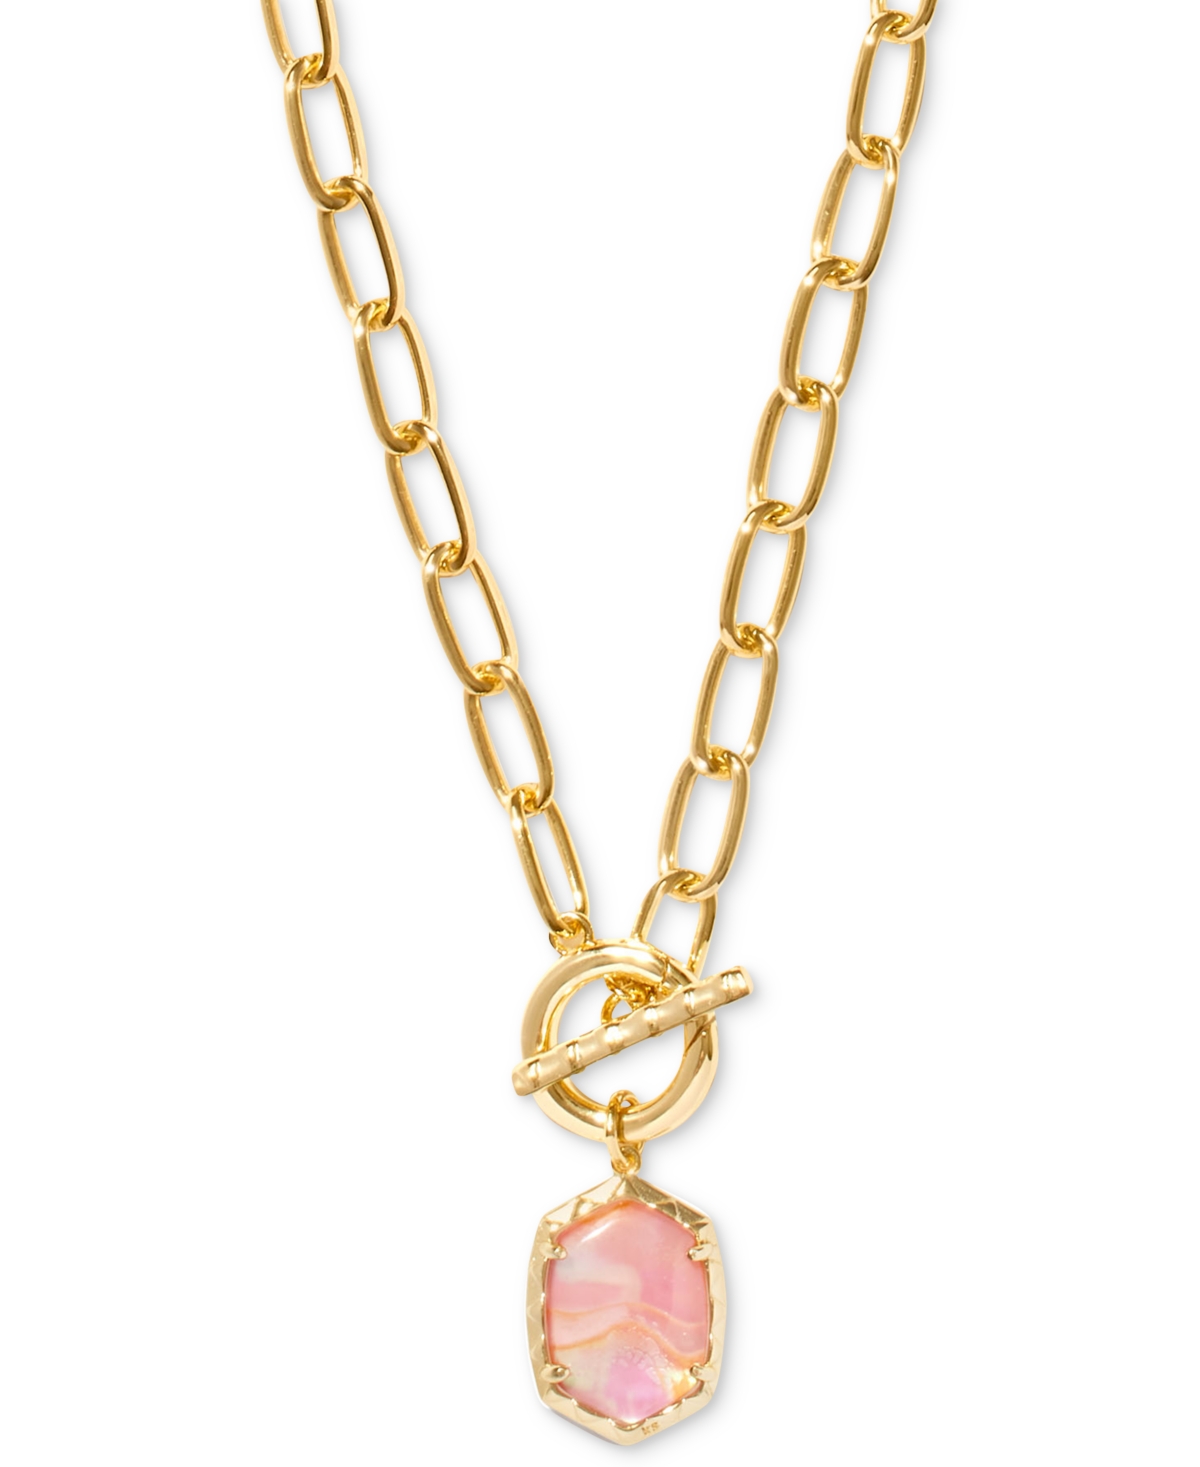 14k Gold-Plated Stone 18" Pendant Necklace - Coral Pink Mother Of Pearl